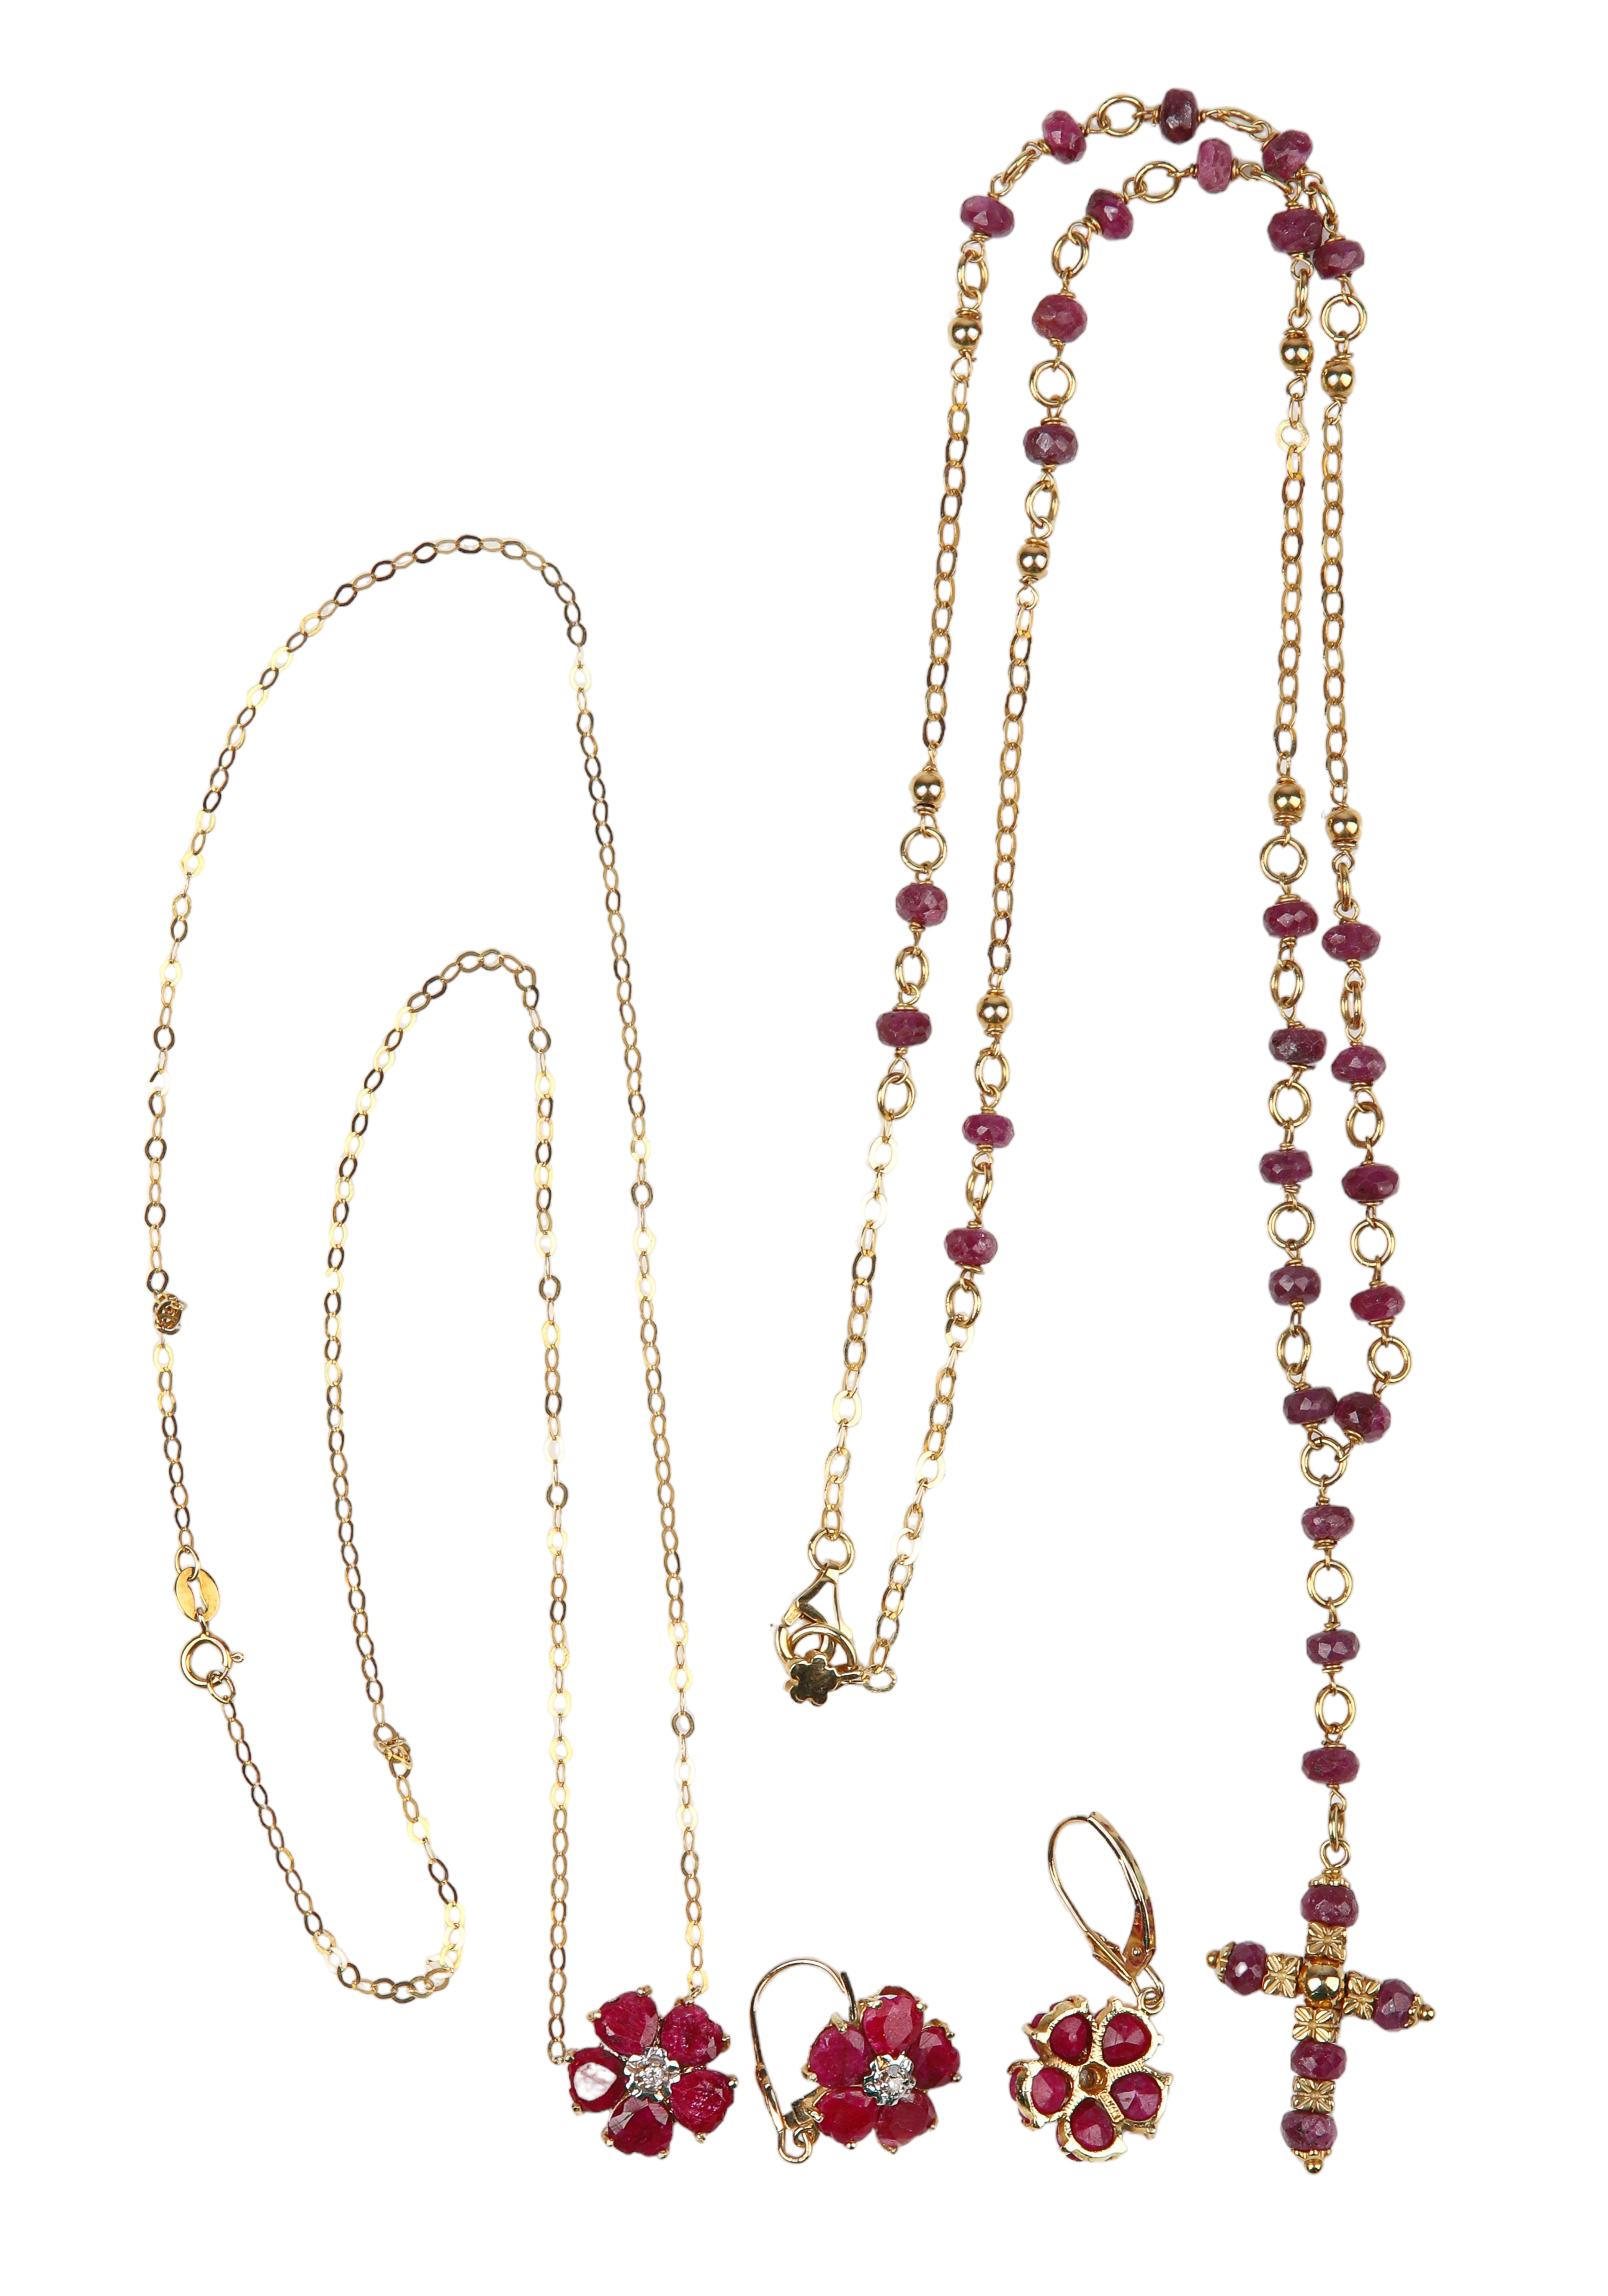  3 14K Yellow Gold Ruby Necklaces 3b18fa